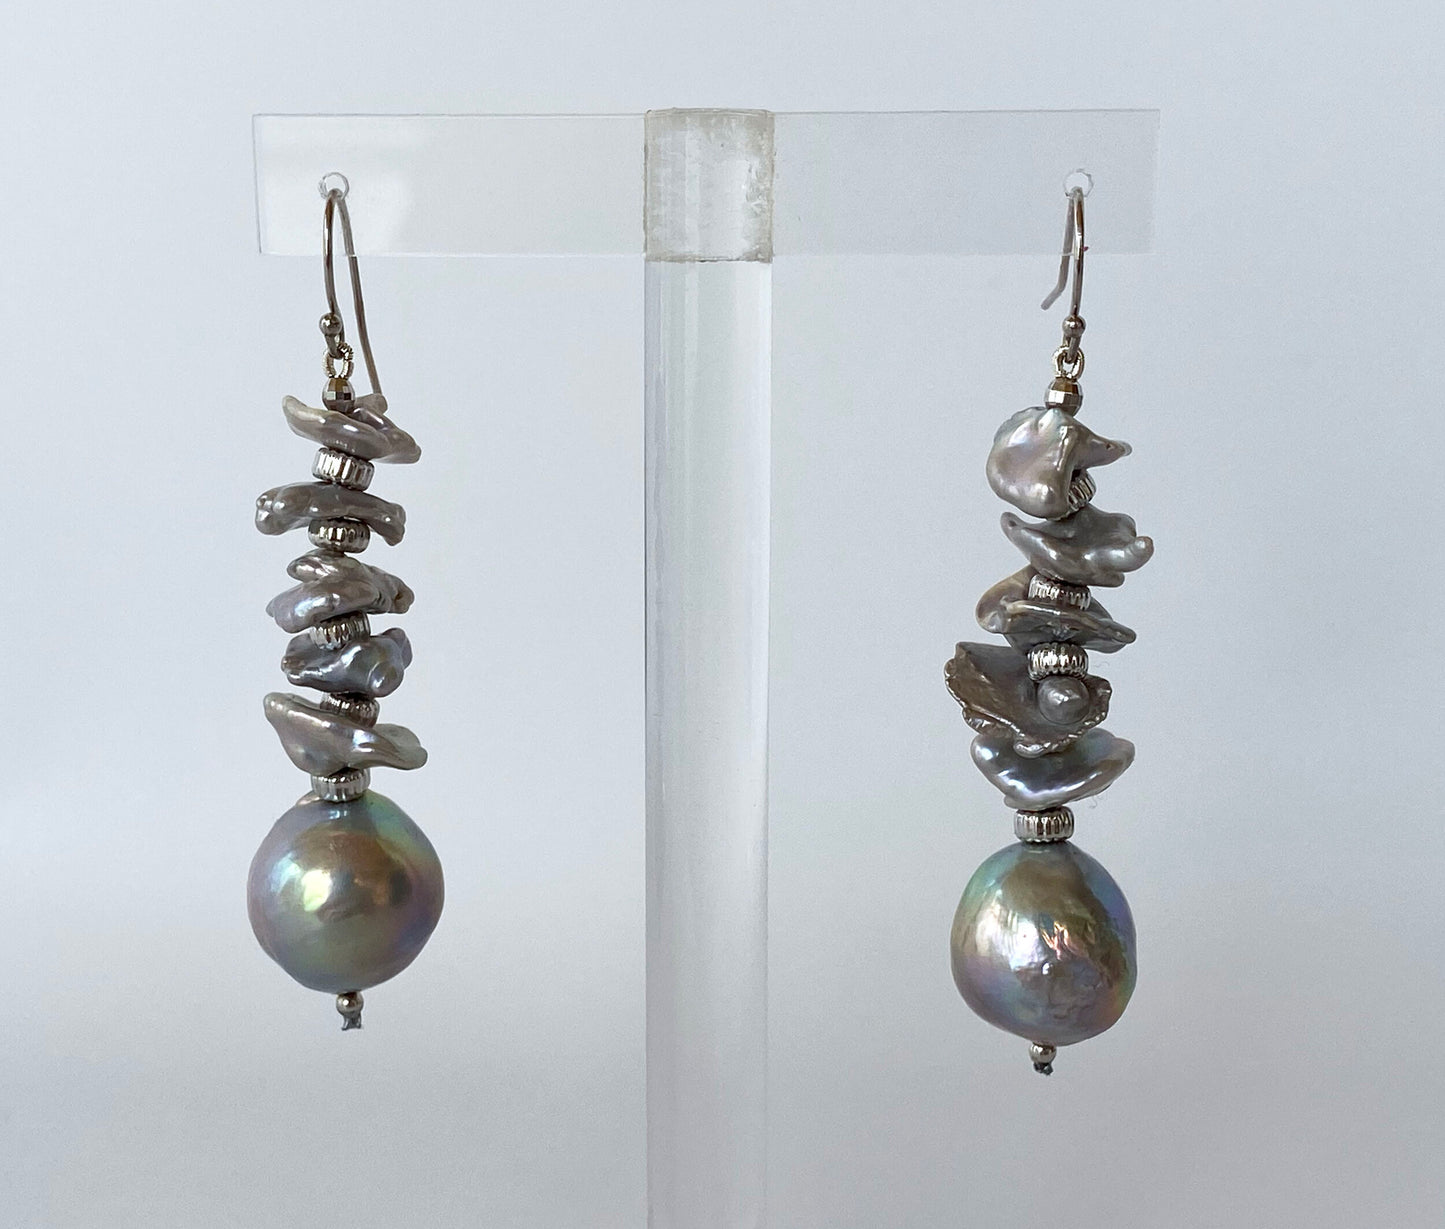 Baroque Pearl Dangle Earrings with Iridescent Grey Pearl and 14K Gold